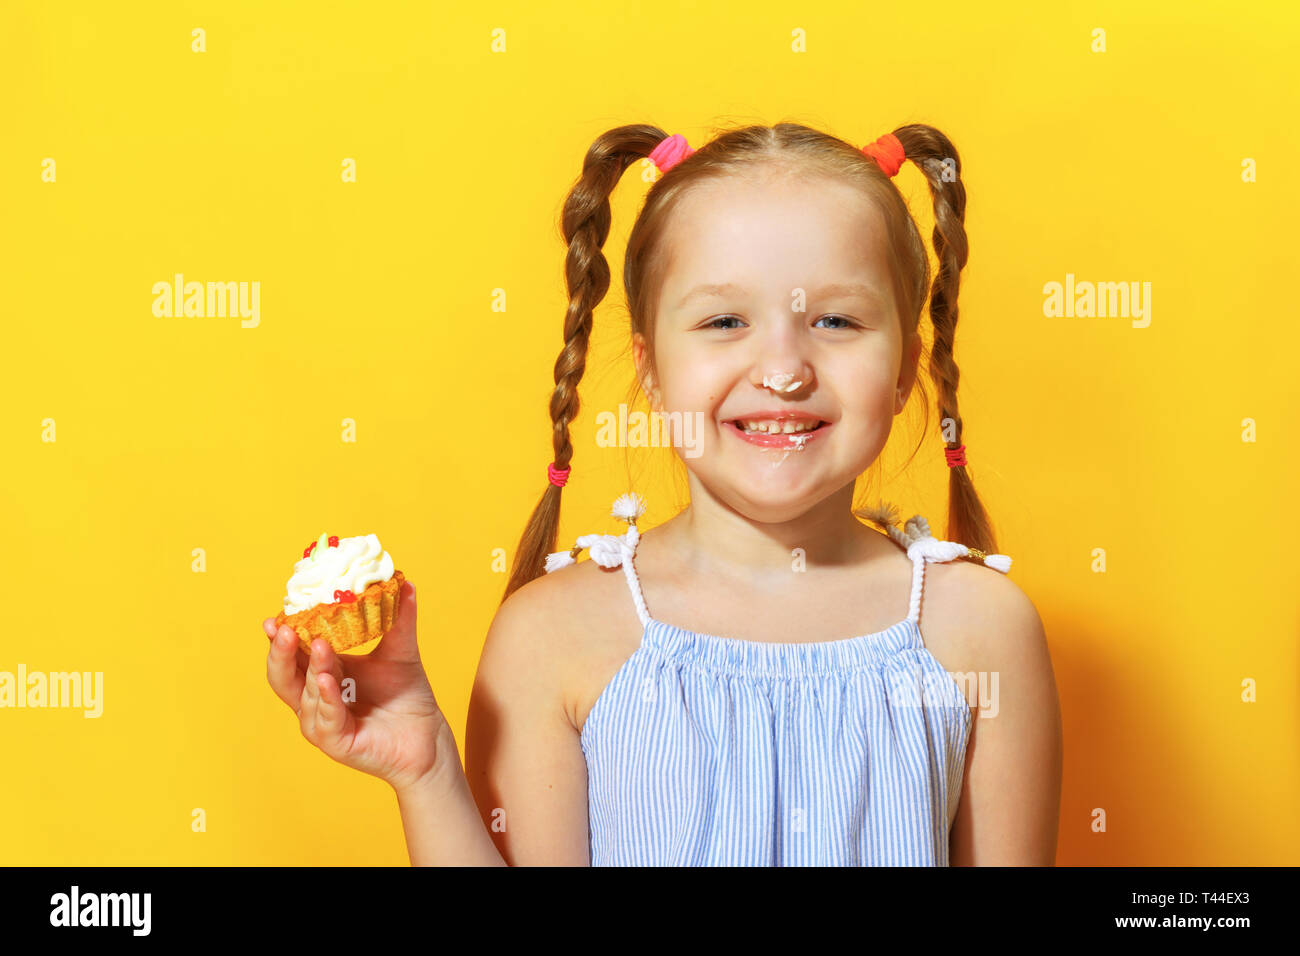 Closeup portrait of a cheerful little sweet tooth girl on a yellow background. The child smeared his nose with cream and holding a cake in his hands. Stock Photo